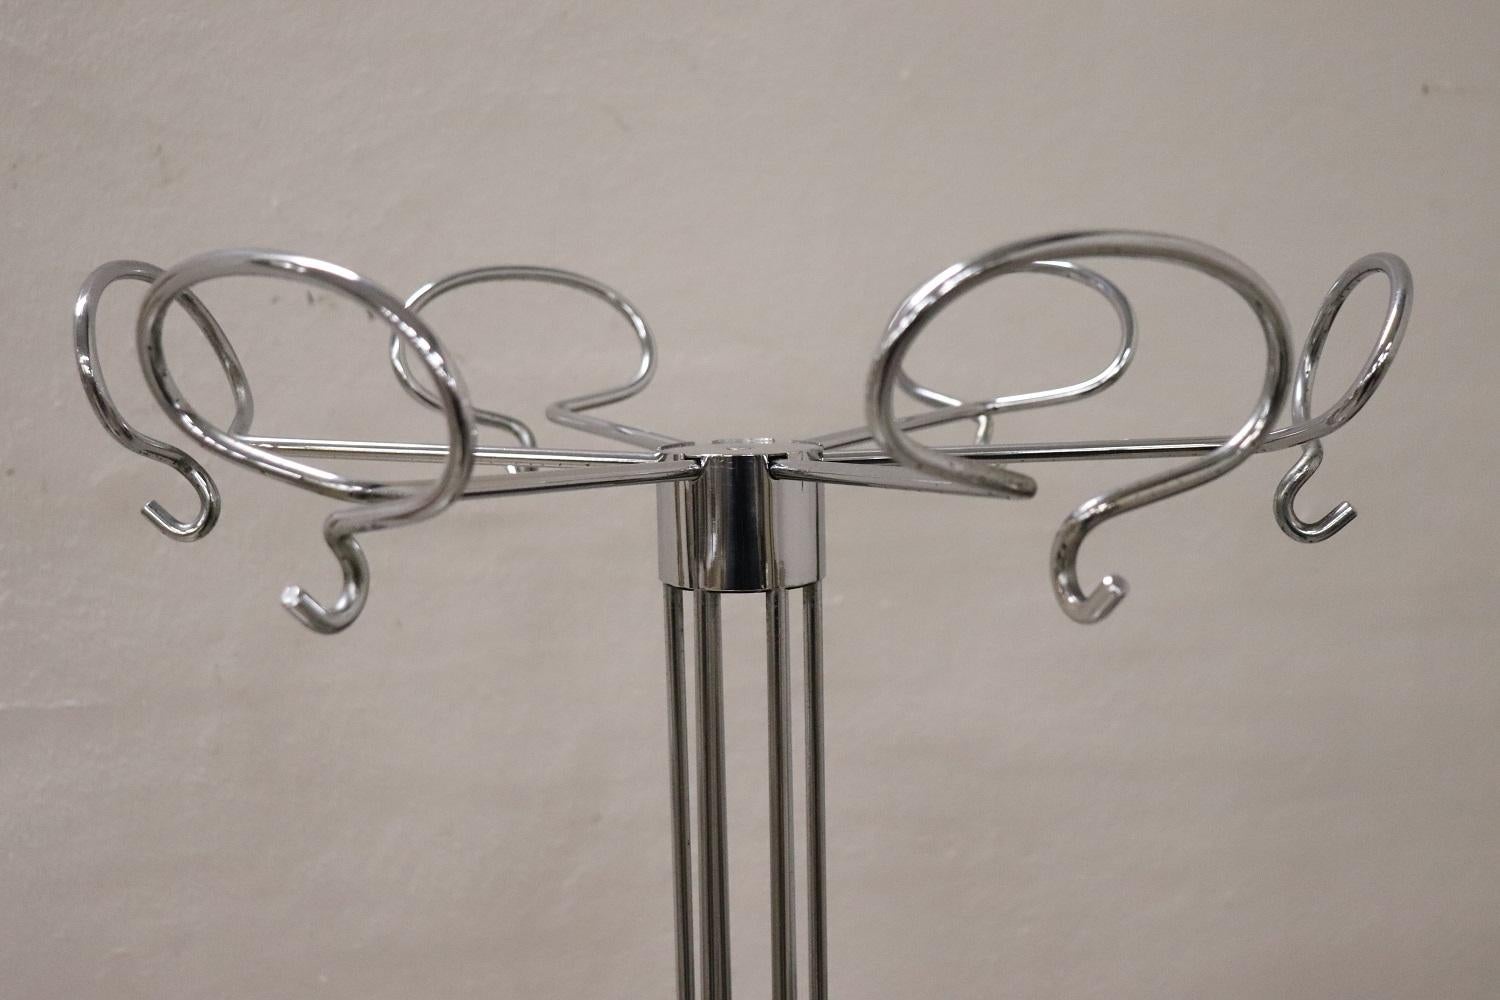 Steel Italian Design Chrome Clothes Hangers by Isao Hosoe for Valenti Luce, 1970s For Sale